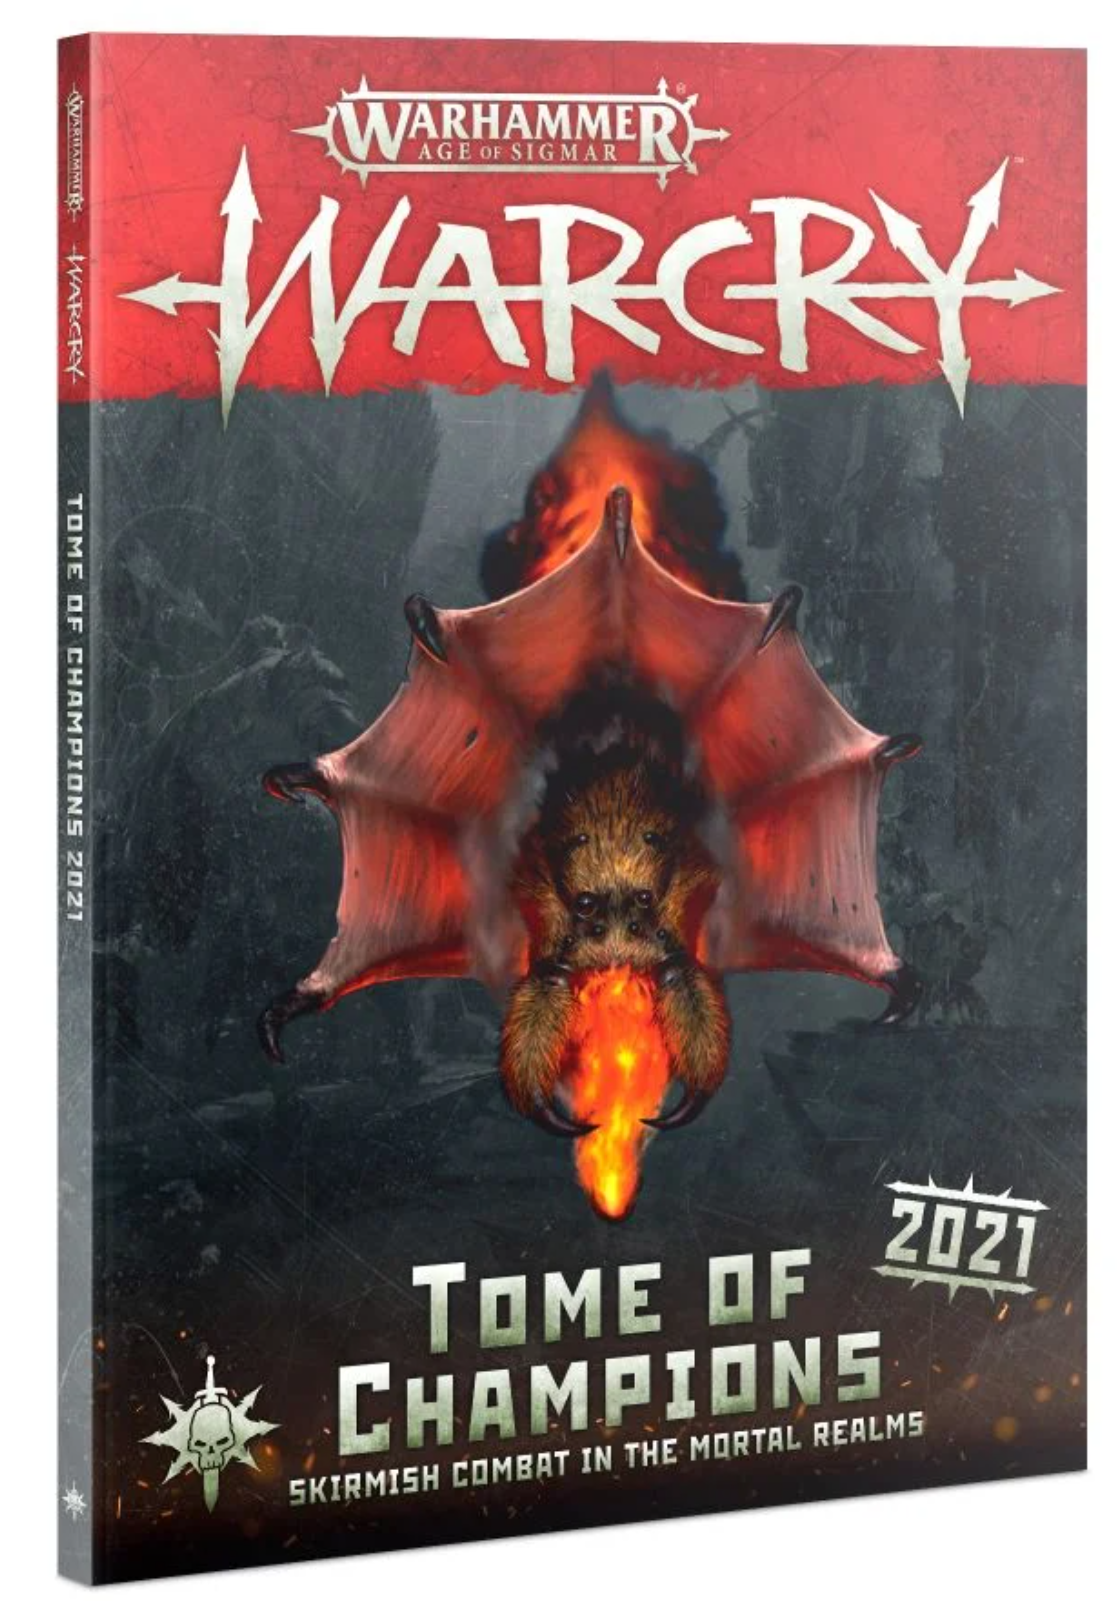 Warcry - Tome of Champions 2021